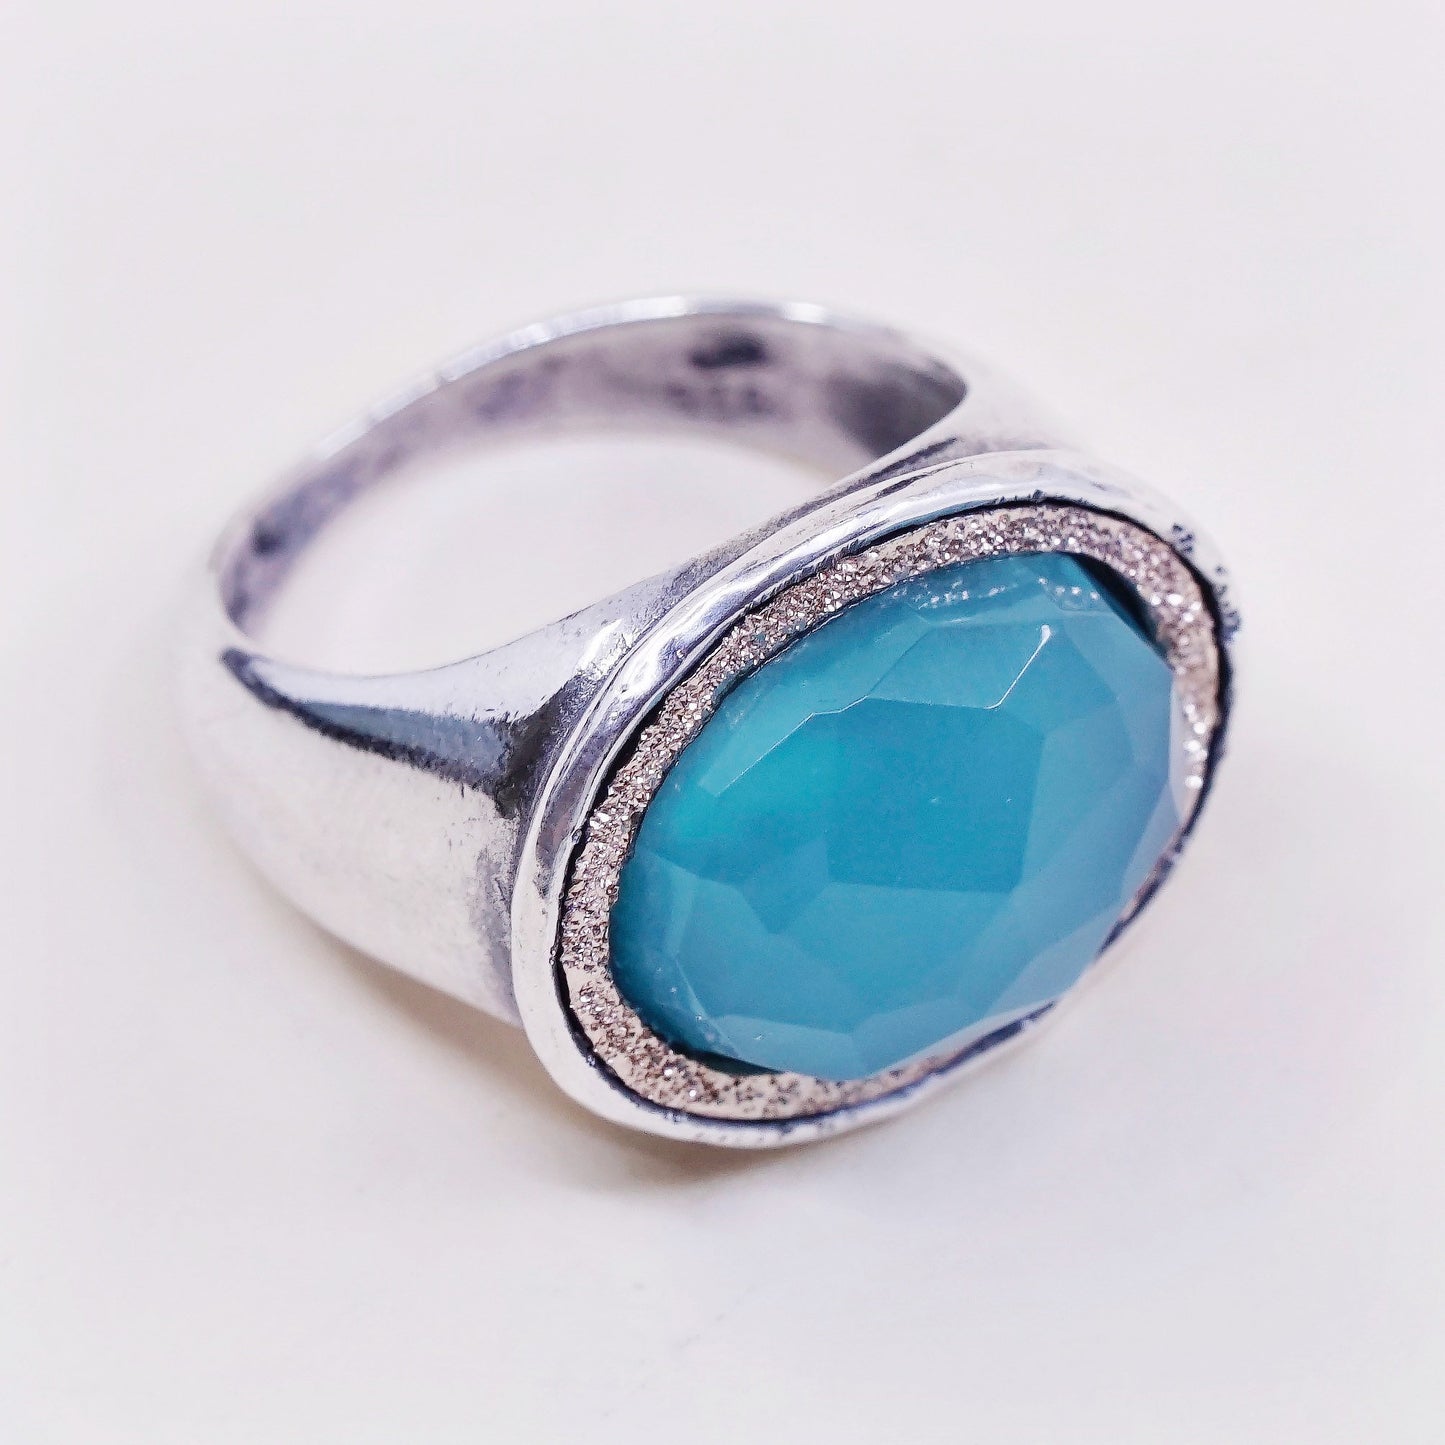 Size 8.5, VTG 14K trim w/ Sterling 925 silver statement ring and chalcedony